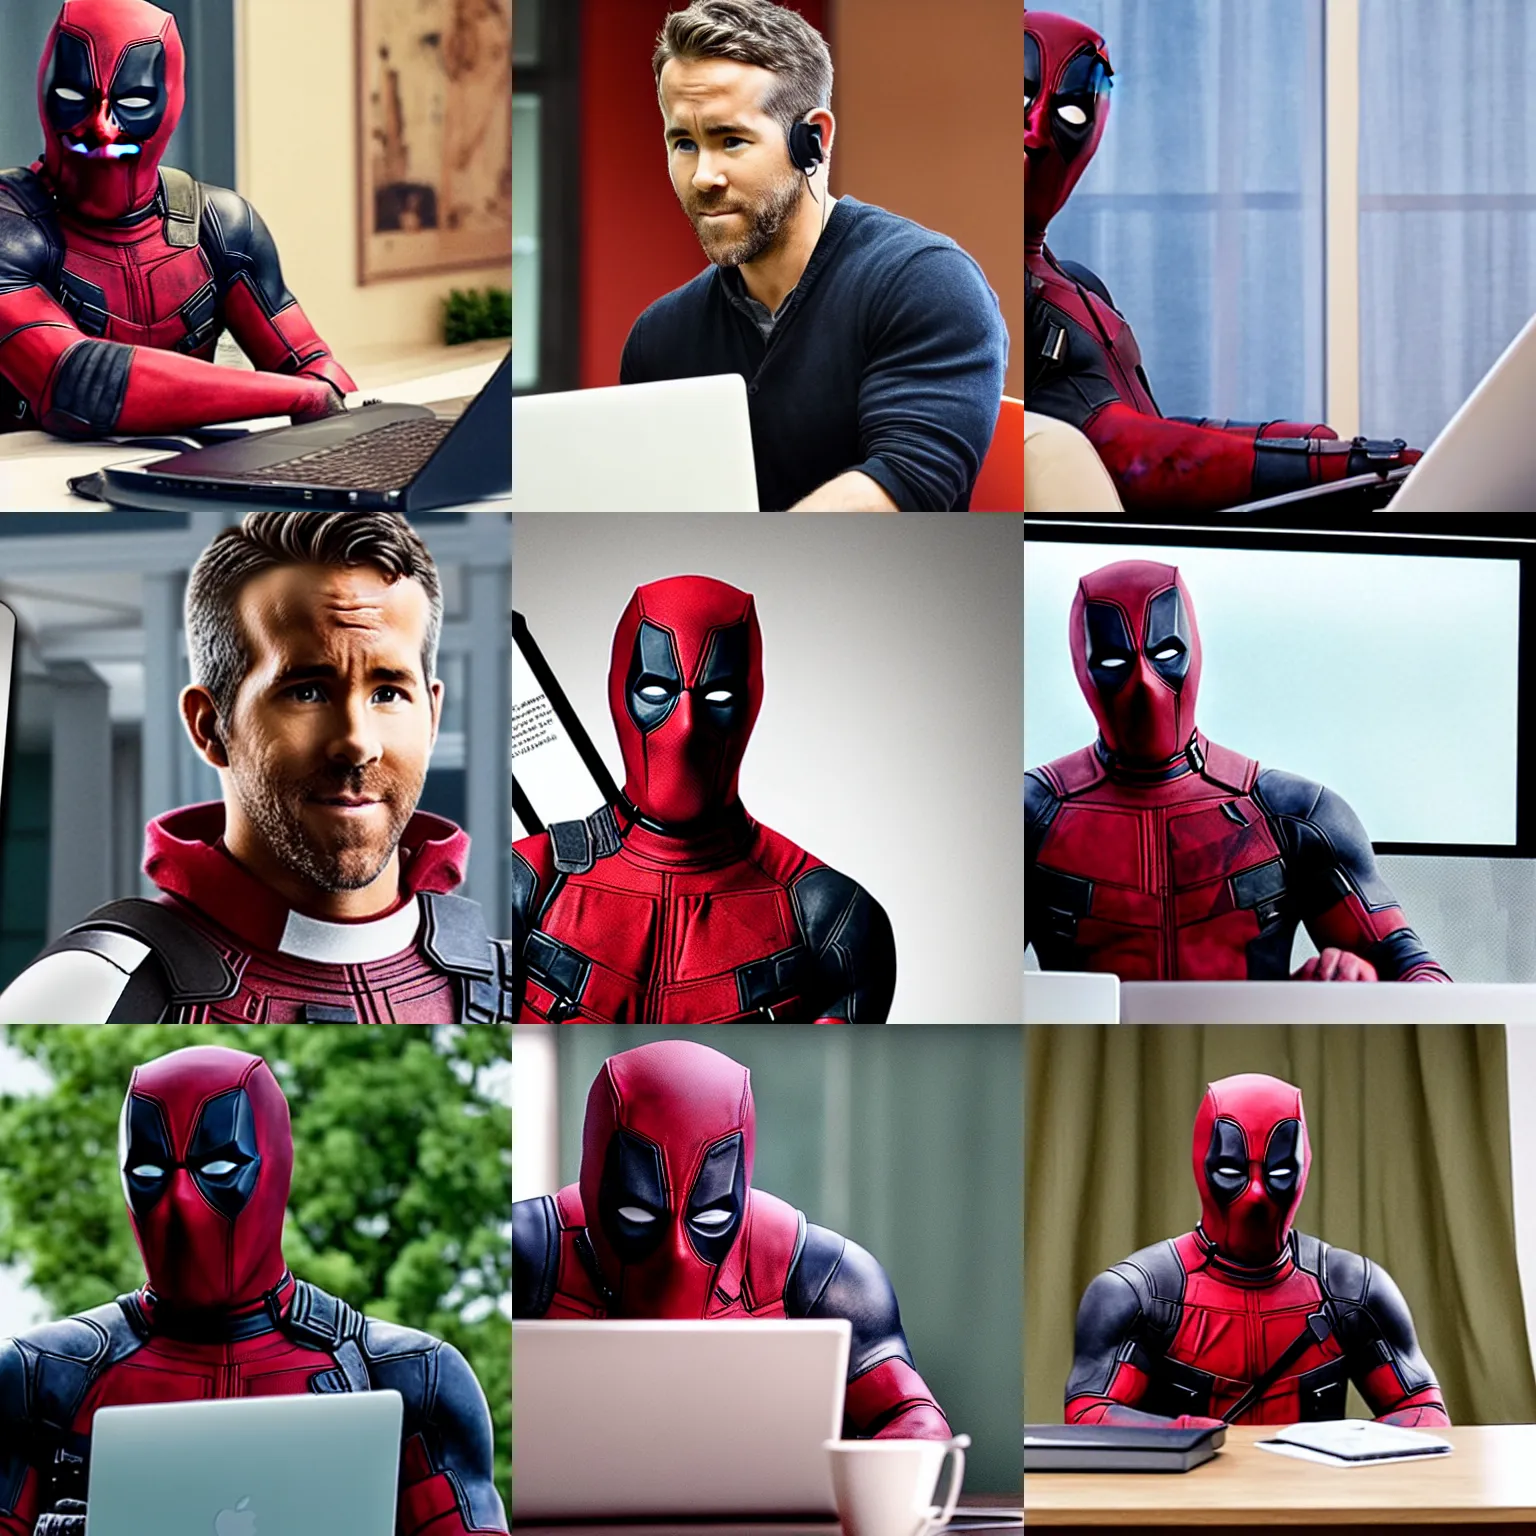 Prompt: ryan reynolds as deadpool browsing discord on his laptop, photograph